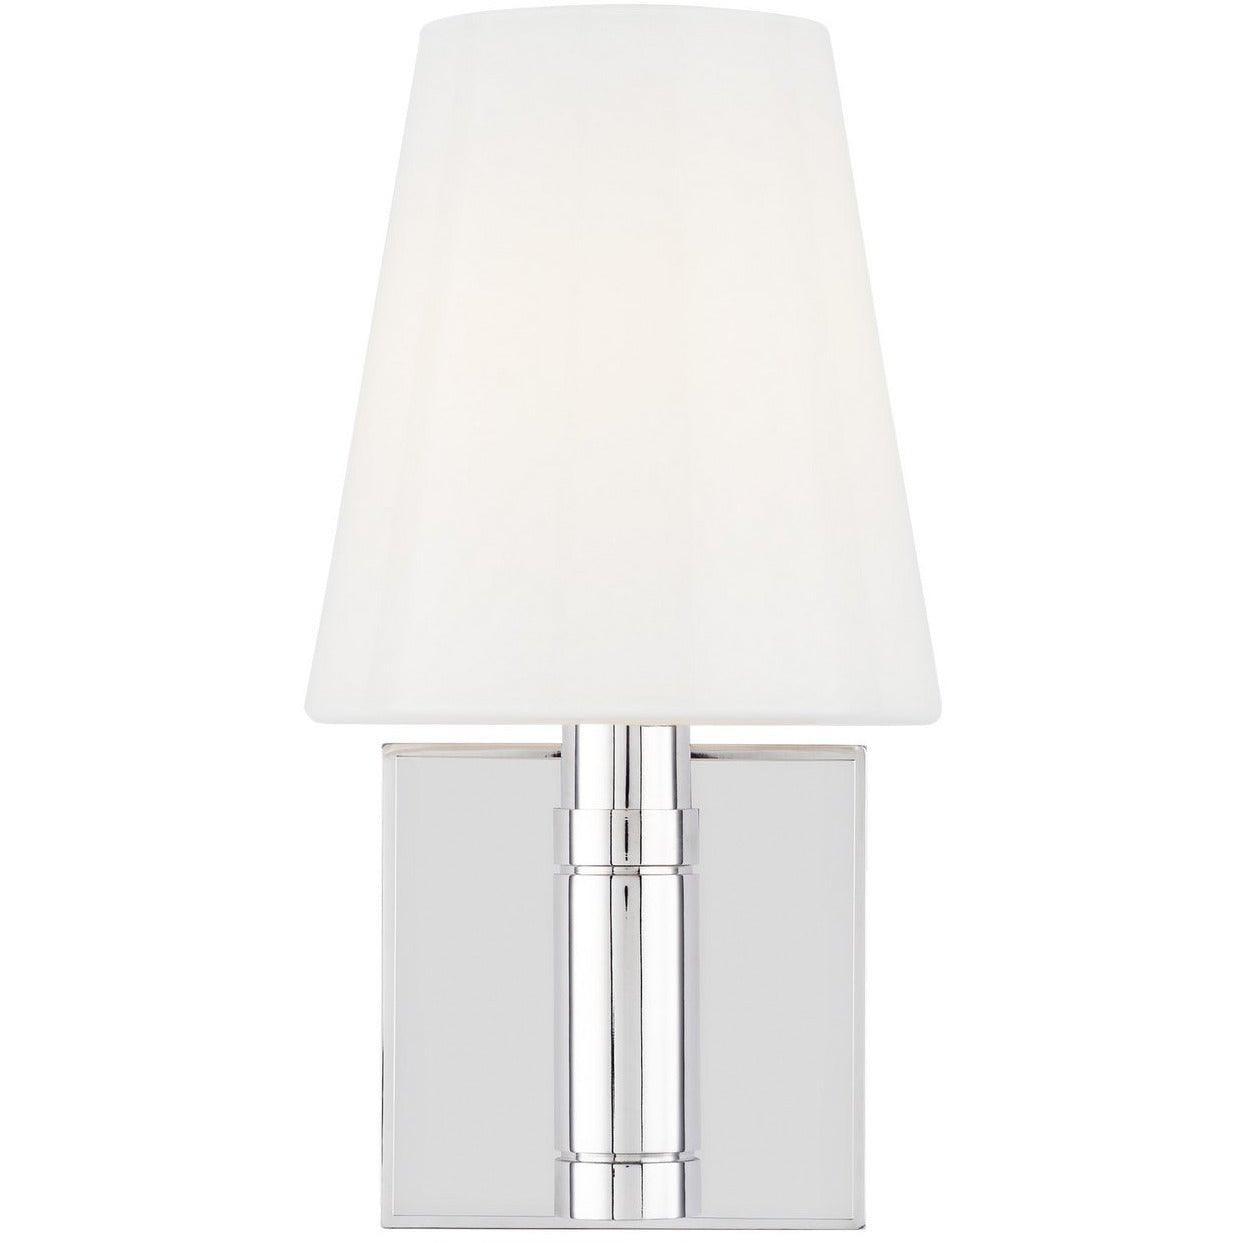 Visual Comfort Studio Collection - Beckham Classic Square Wall Sconce - TV1011PN | Montreal Lighting & Hardware